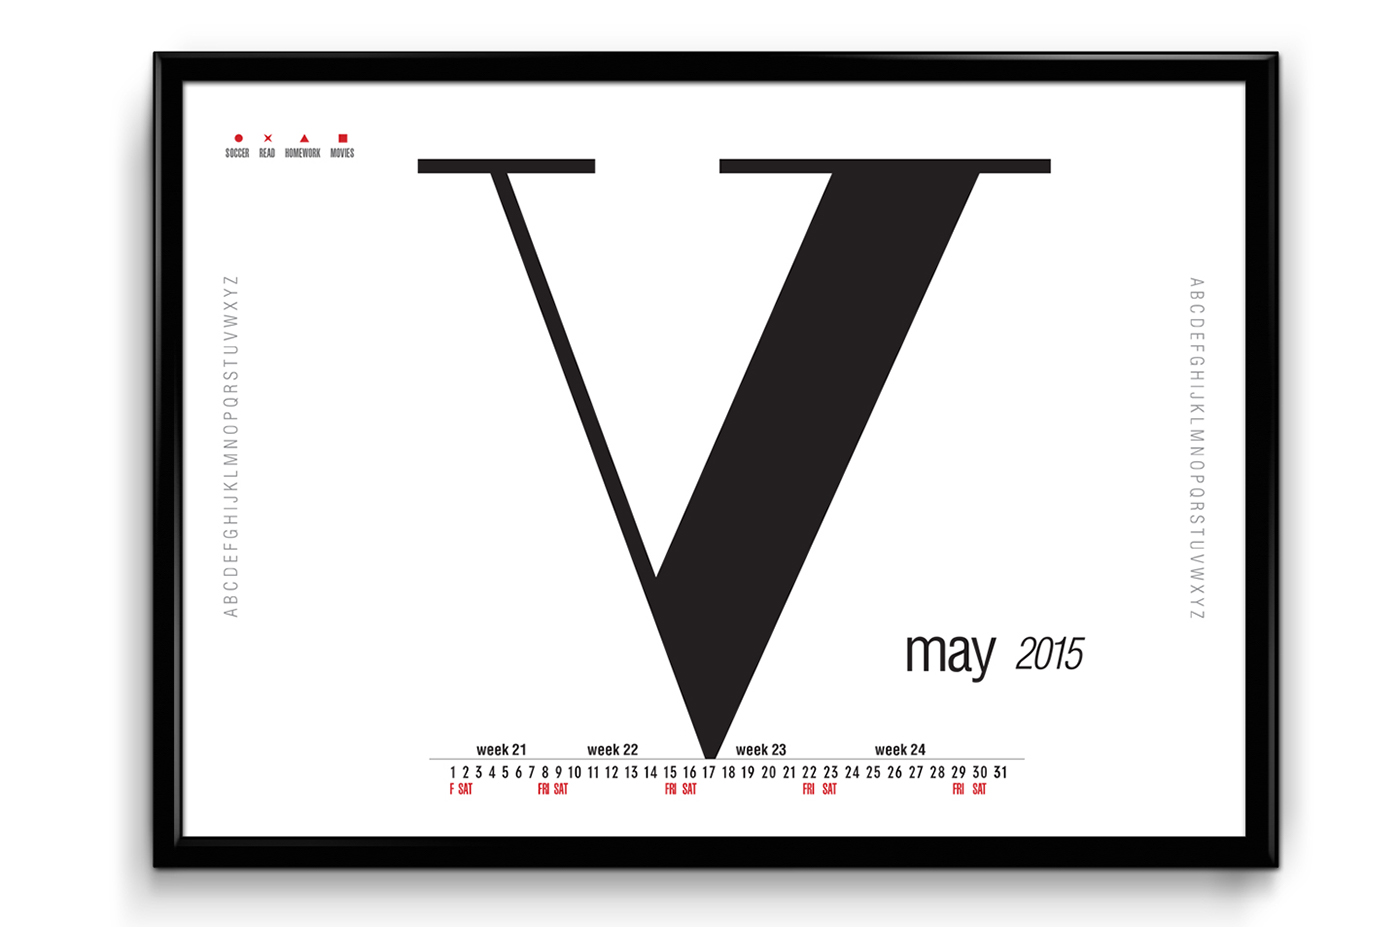 type typographic calendar balance years months days artist creative poster posters type poster print hierarchy system